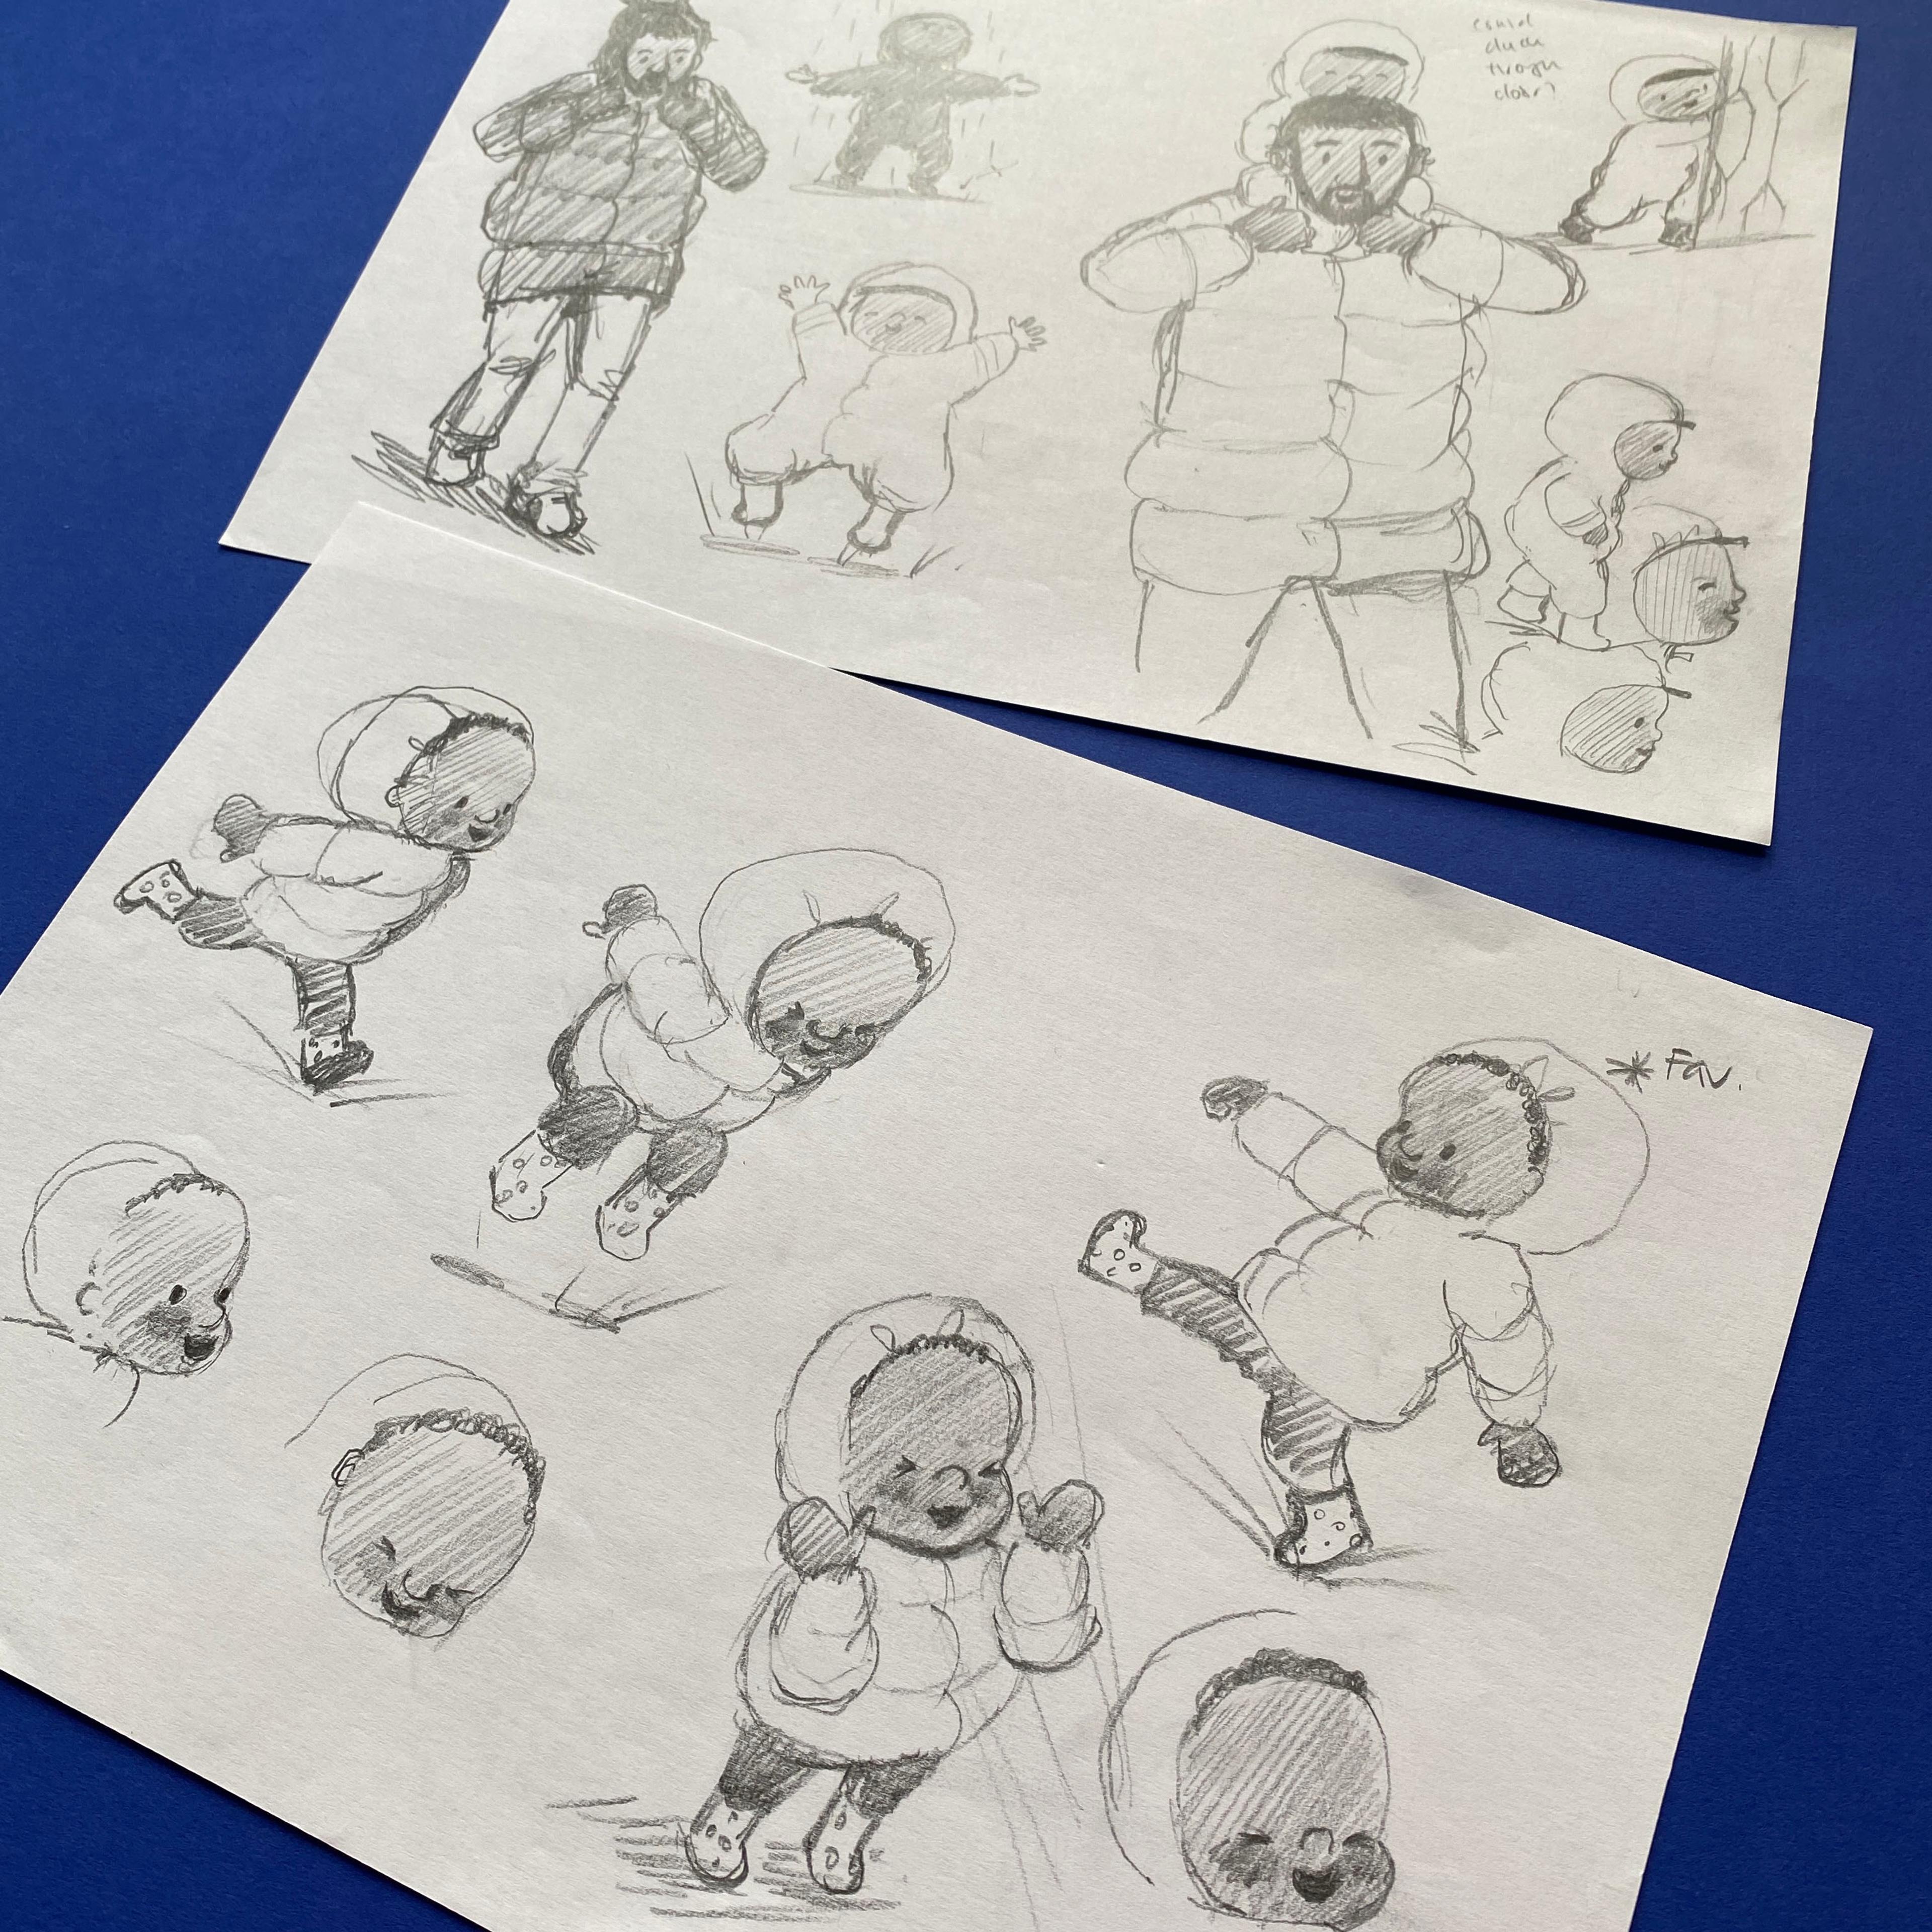 Two sheets of paper with pencil illustrations of work in progress drawings.